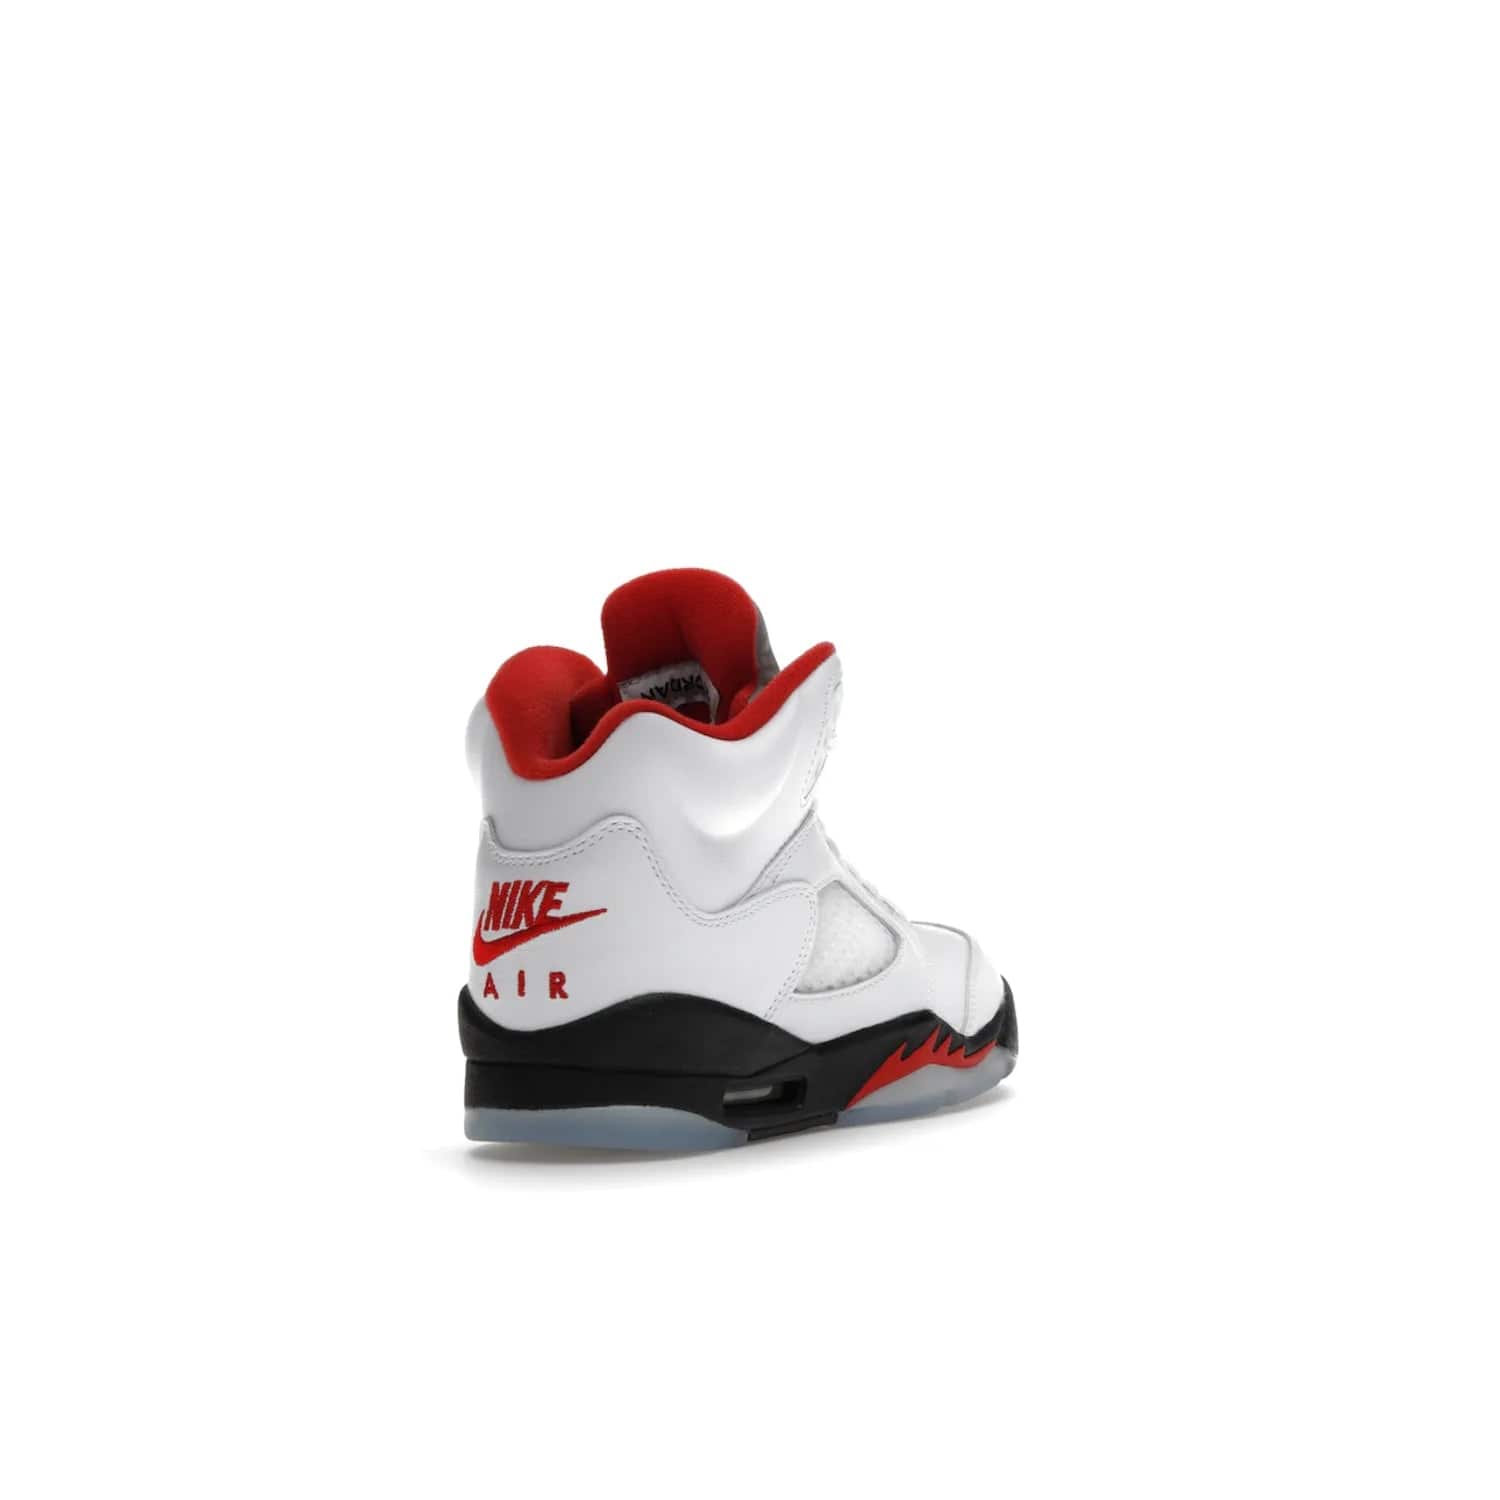 Jordan 5 Retro Fire Red Silver Tongue (2020) (GS) - Image 31 - Only at www.BallersClubKickz.com - A stylish option for any grade schooler. The Air Jordan 5 Retro Fire Red Silver Tongue 2020 GS features a combination of four hues, premium white leather, a clear mesh mid-upper and a reflective silver tongue. An icy translucent blue outsole completes the look. Available on May 2, $150.